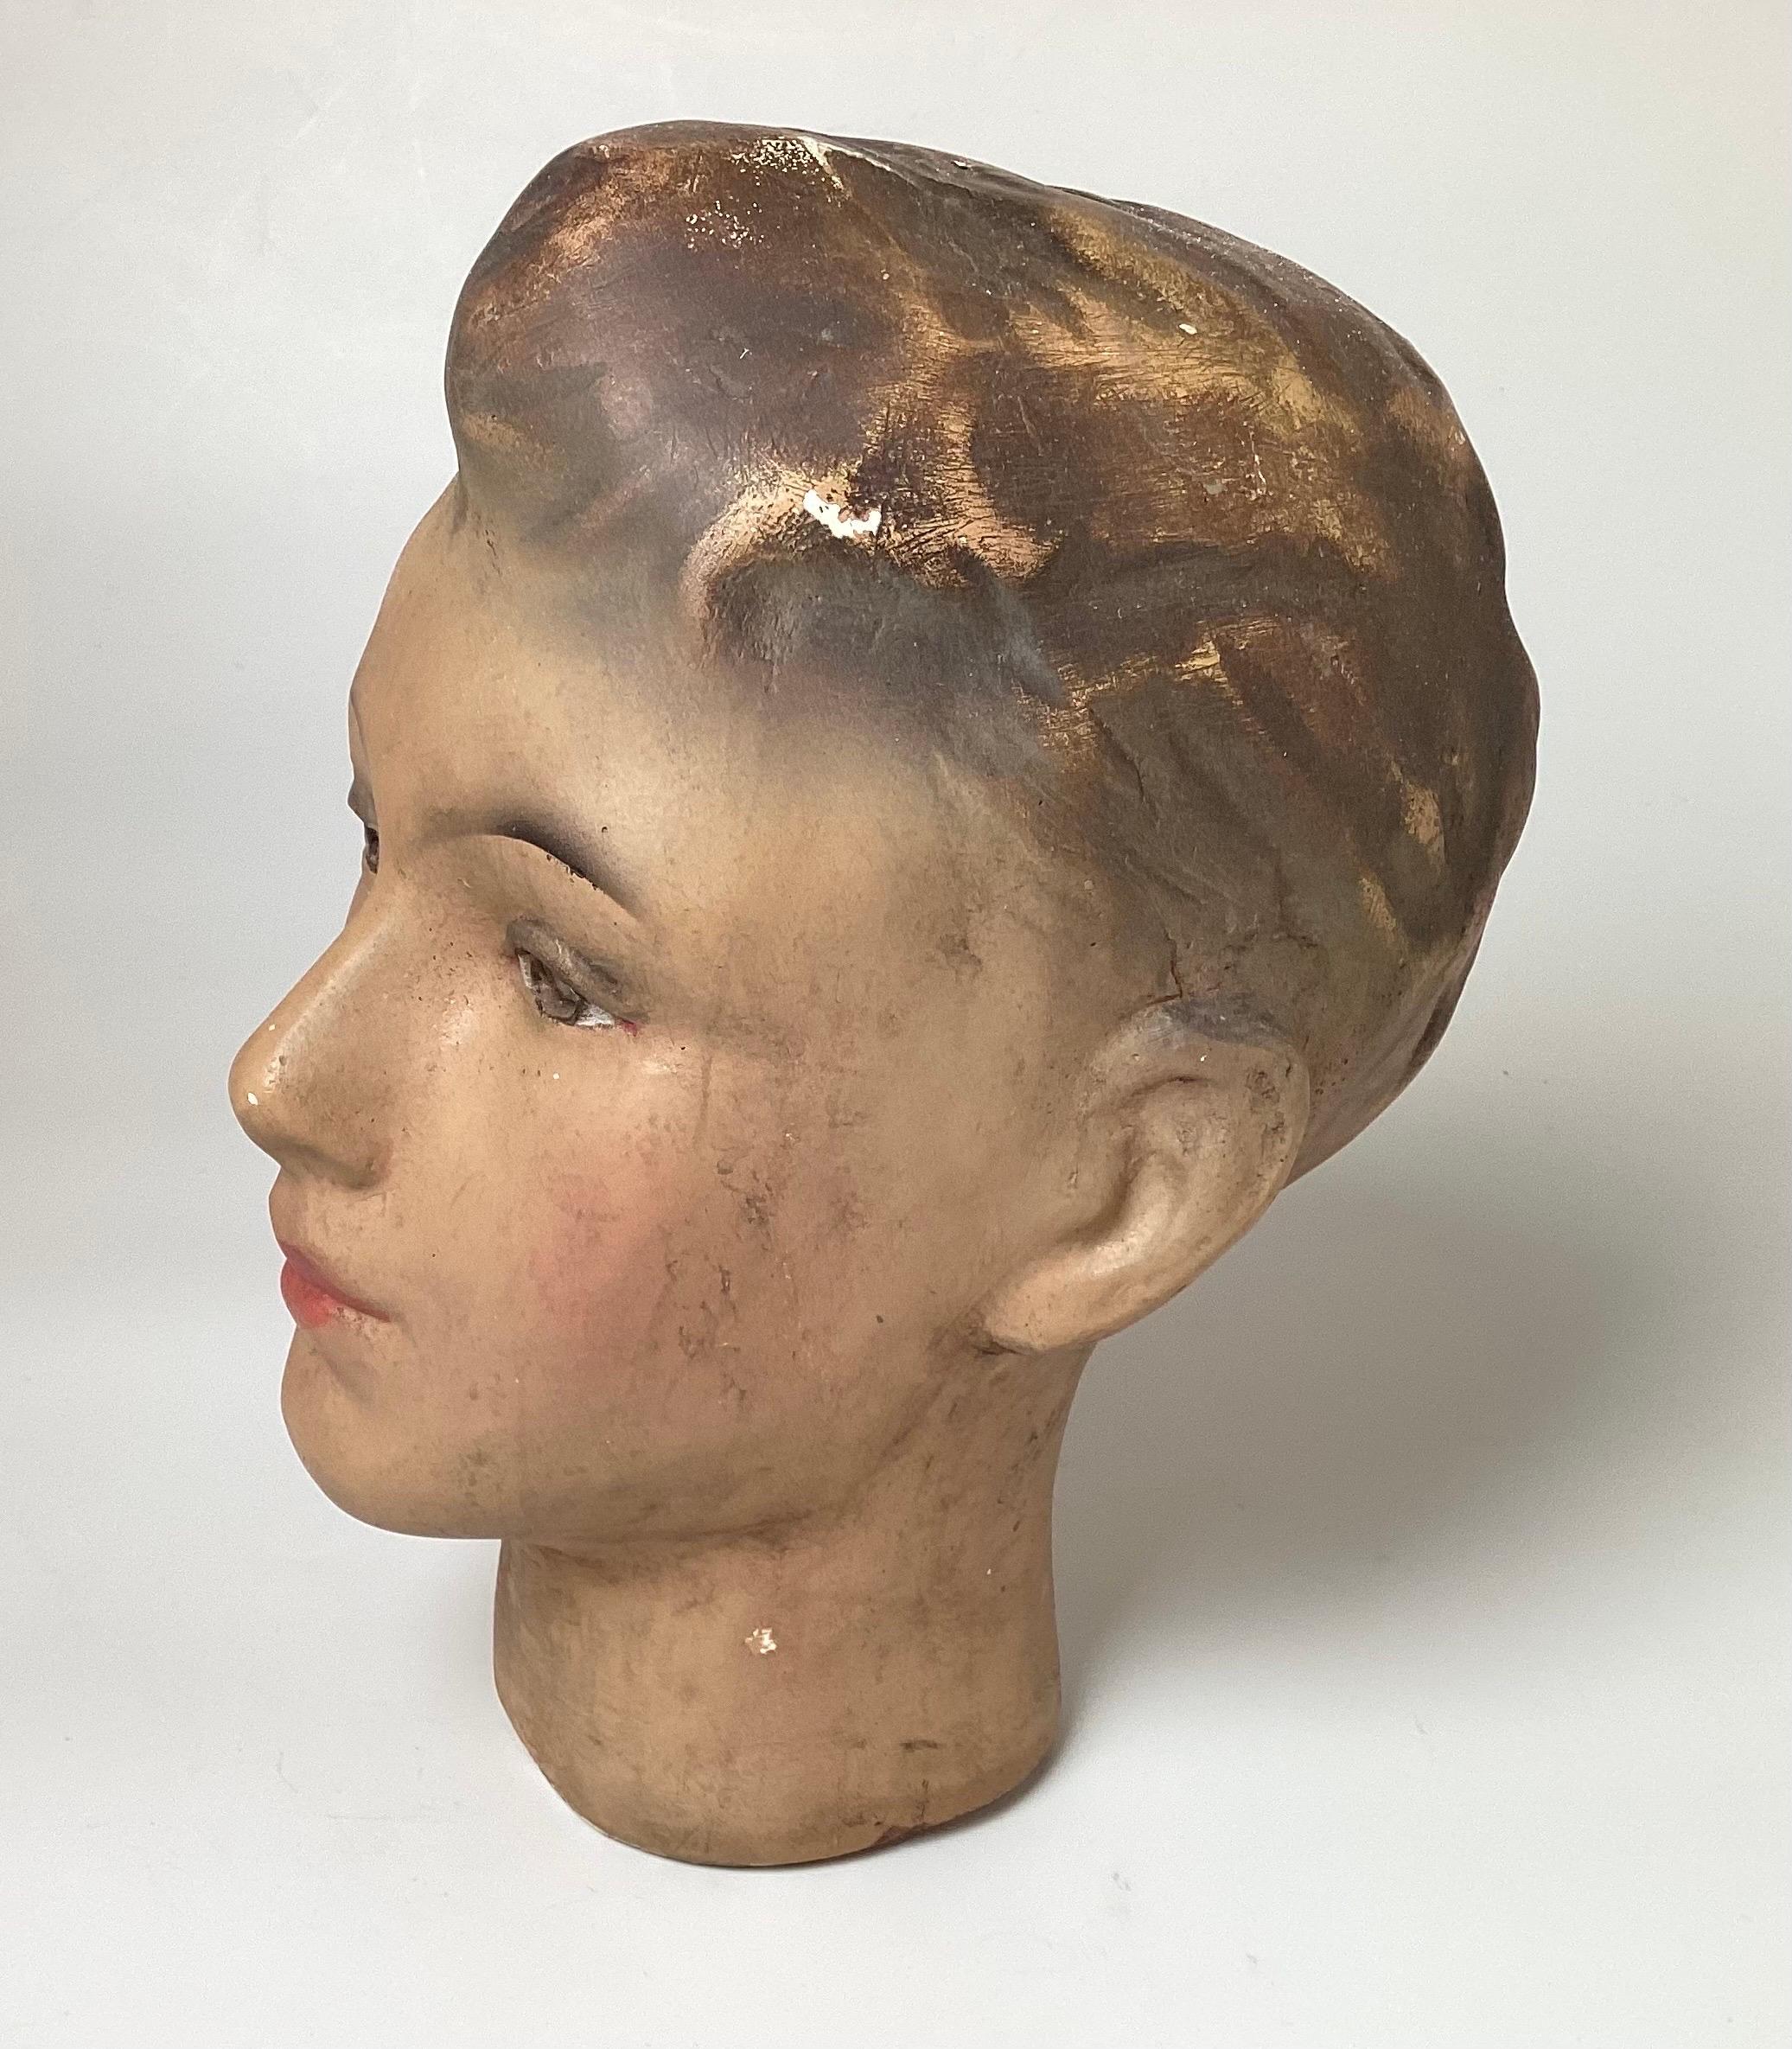 All original plaster mannequin head from a Belgium department store. The face of a teen aged young man with the original hand panted face and hair, made of a heavy plaster. Europe, 1940s 11 inches tall.